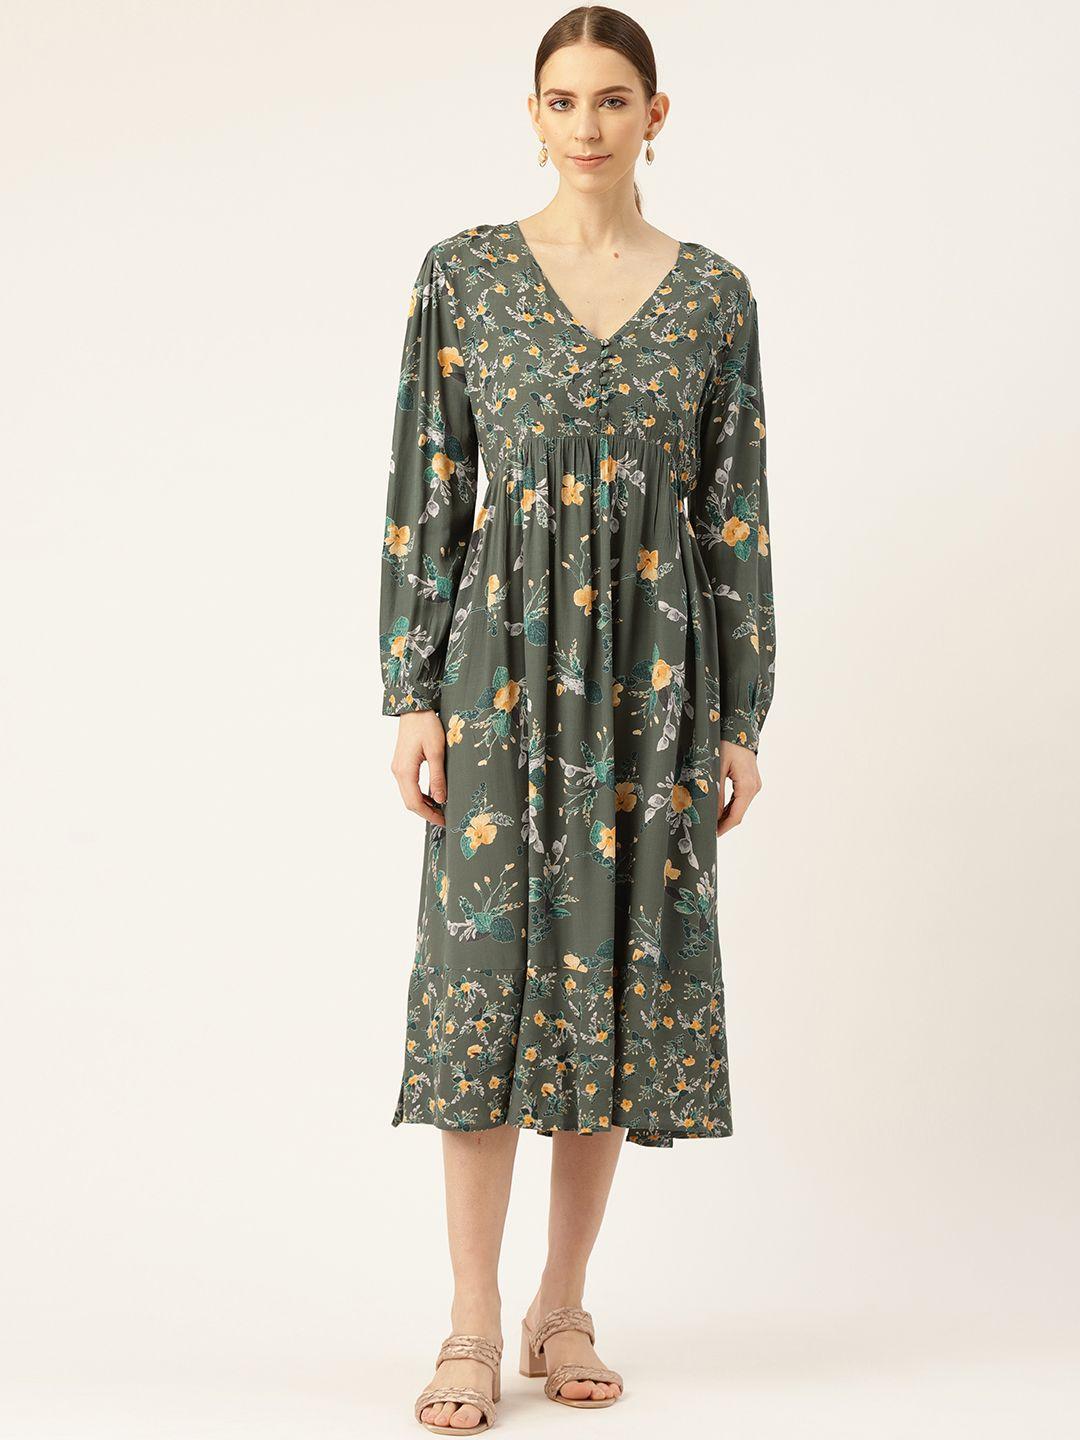 off label women olive green & yellow floral printed a-line dress